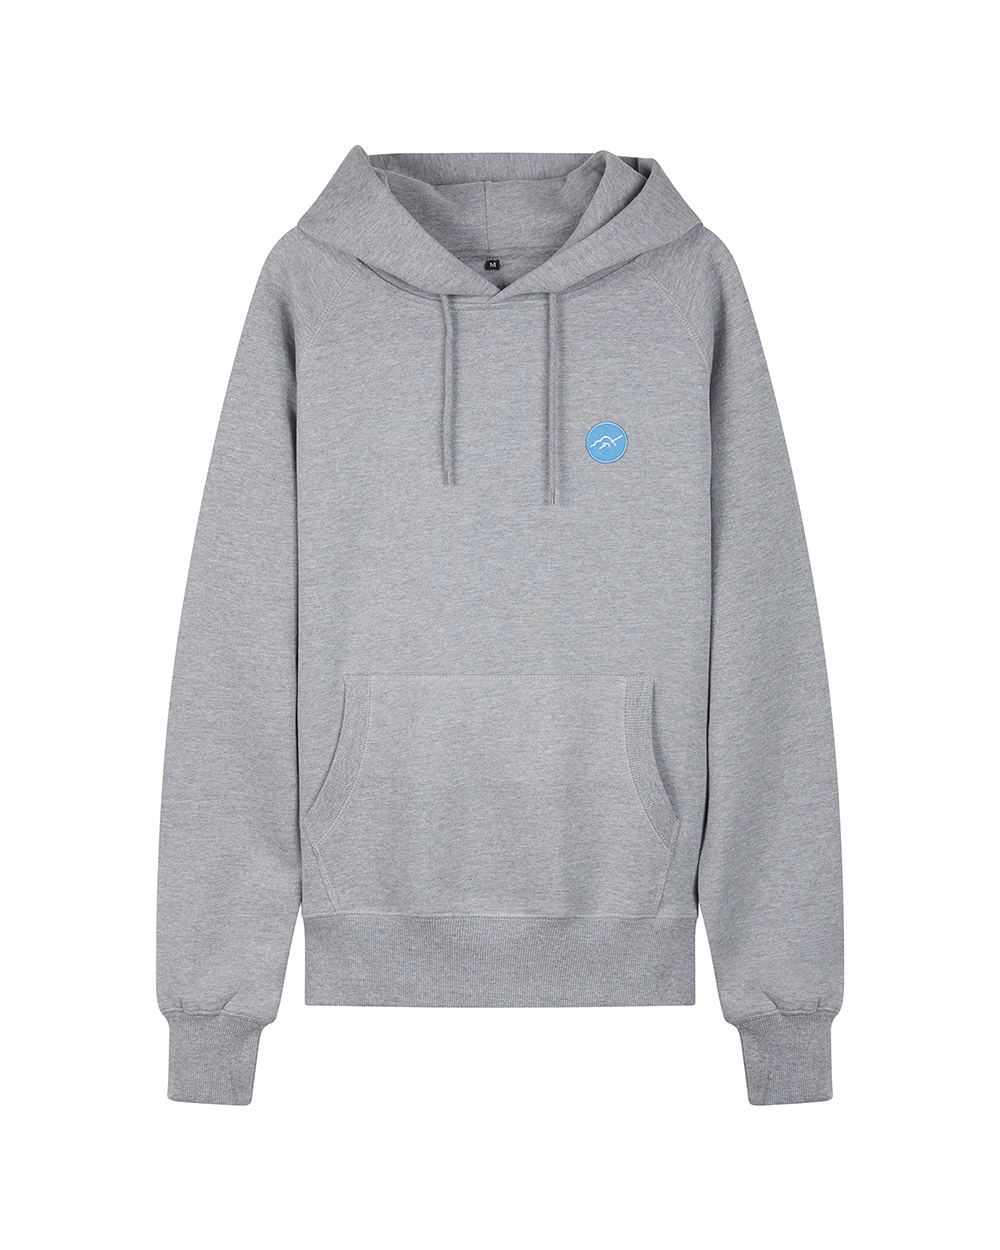 Hoodie« The classic » grey - Bball in the sky